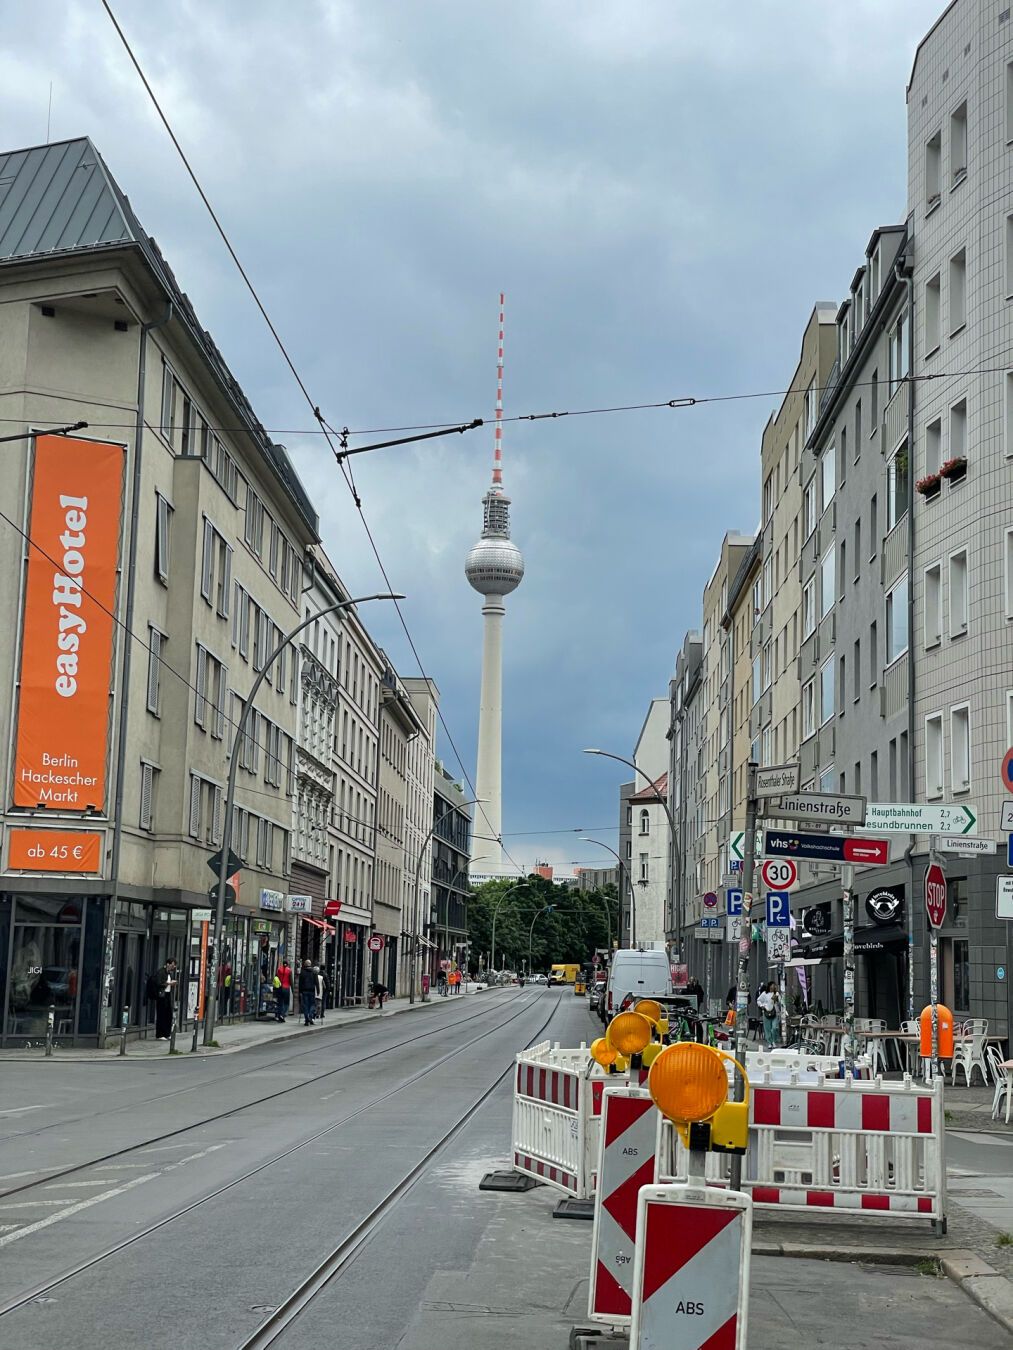 In the photo you can see a street, and at the end of it, you can see the tower in Alexander Platz (Berlin). The sky is cloudy.